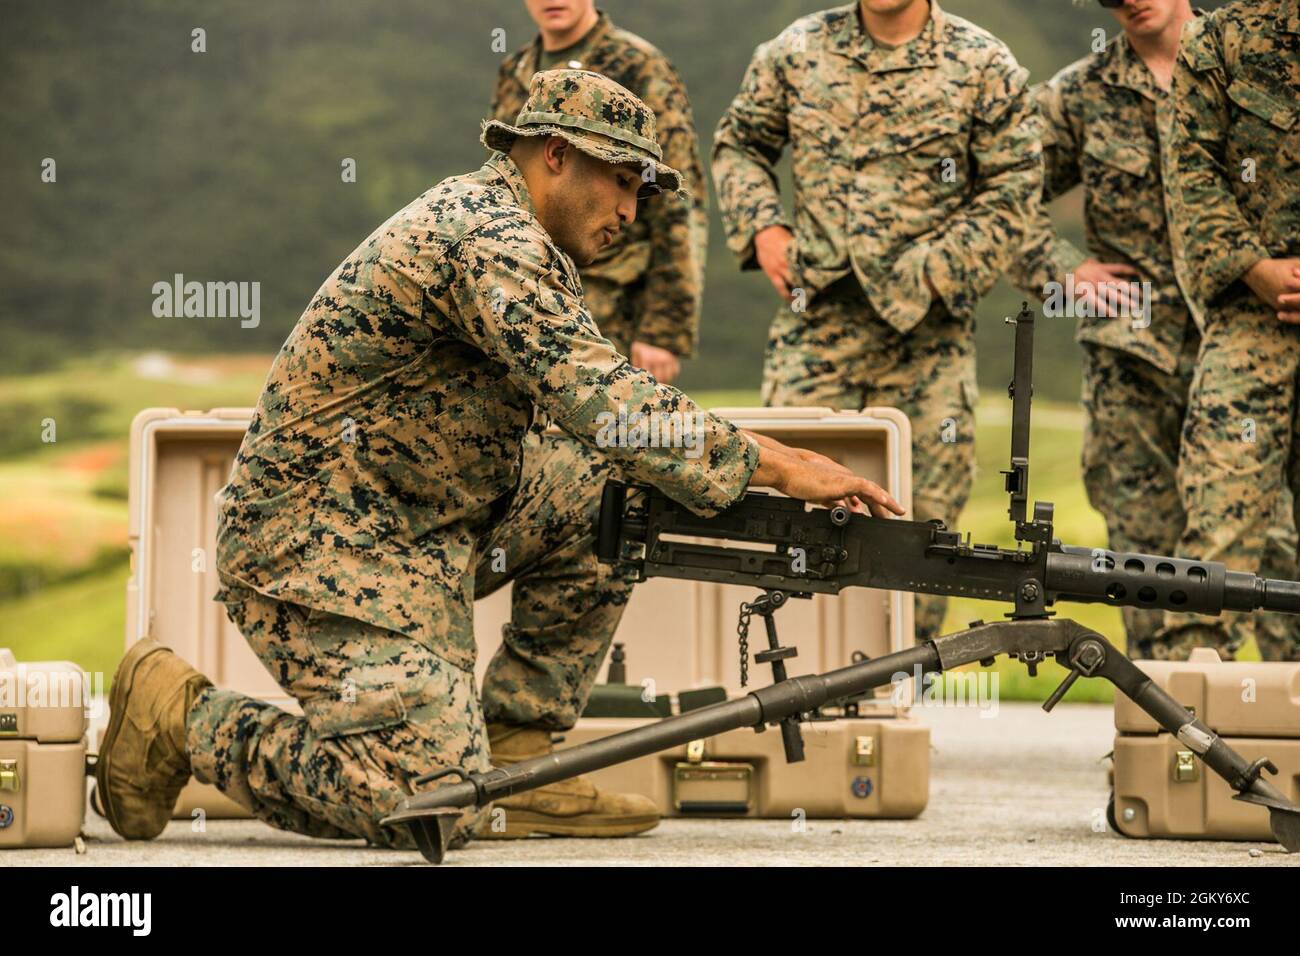 U.S. Marine Corps Cpl. Idan Urrutiagarces, a section leader with Fox Company, 2nd Battalion, 2nd Marines, 3d Marine Division, teaches Marines how to operate an M2 .50-caliber machine gun before conducting a machine gun course of fire on Range 10, Camp Schwab, Okinawa, Japan, July 26, 2021. Marines with 3d Landing Support Battalion, Combat Logistics Regiment 3, 3d Marine Logistics Group, assisted by Marines with 2/2, conducted a range to maintain proficiency while utilizing mounted M2 .50-caliber and M240B medium machine guns. 3d MLG, based out of Okinawa, Japan, is a forward deployed combat un Stock Photo